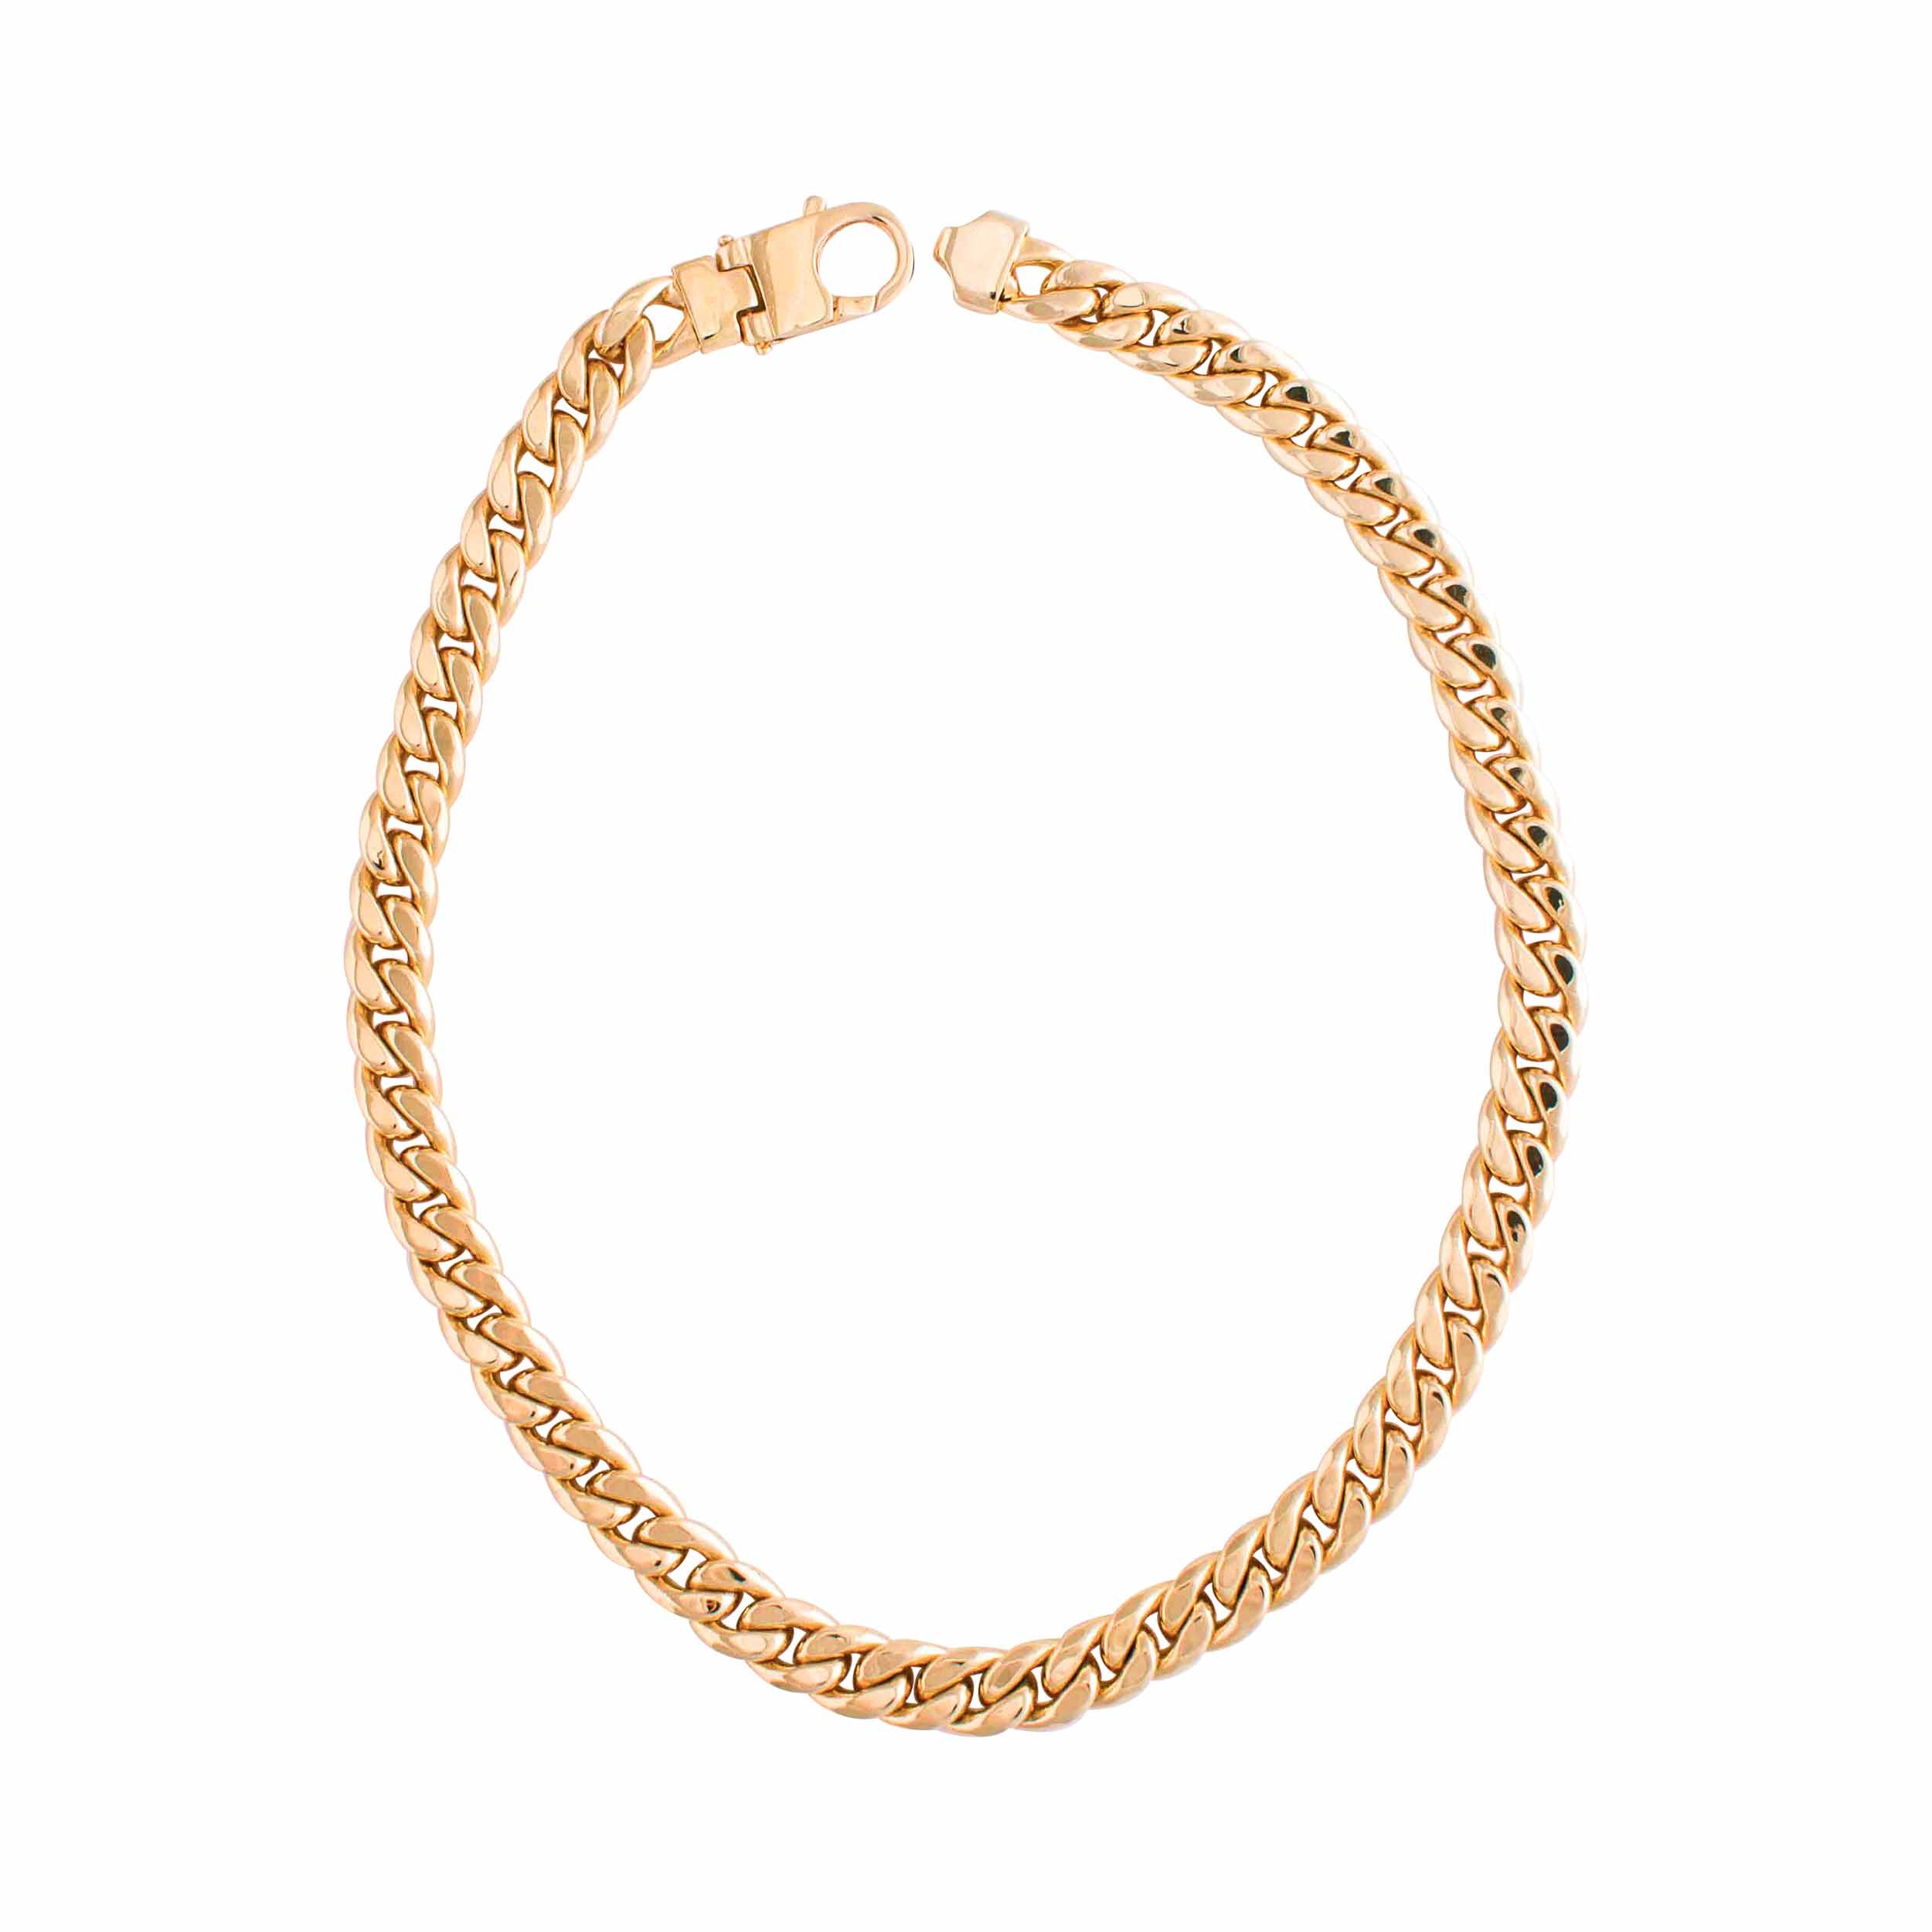 GOLD CUBAN CHAIN NECKLACE